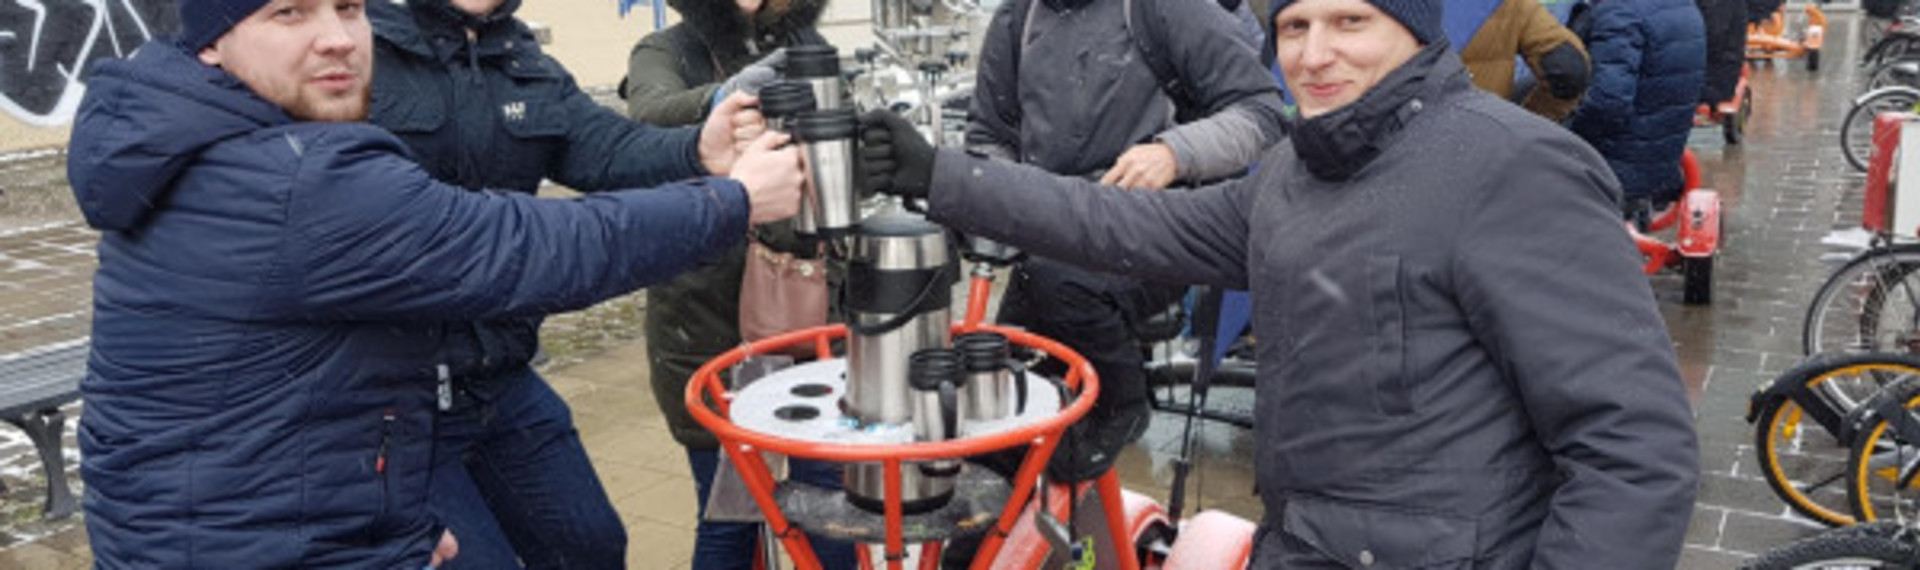 Mulled Wine Conference Bike Tour In Munich | Pissup Stag Dos